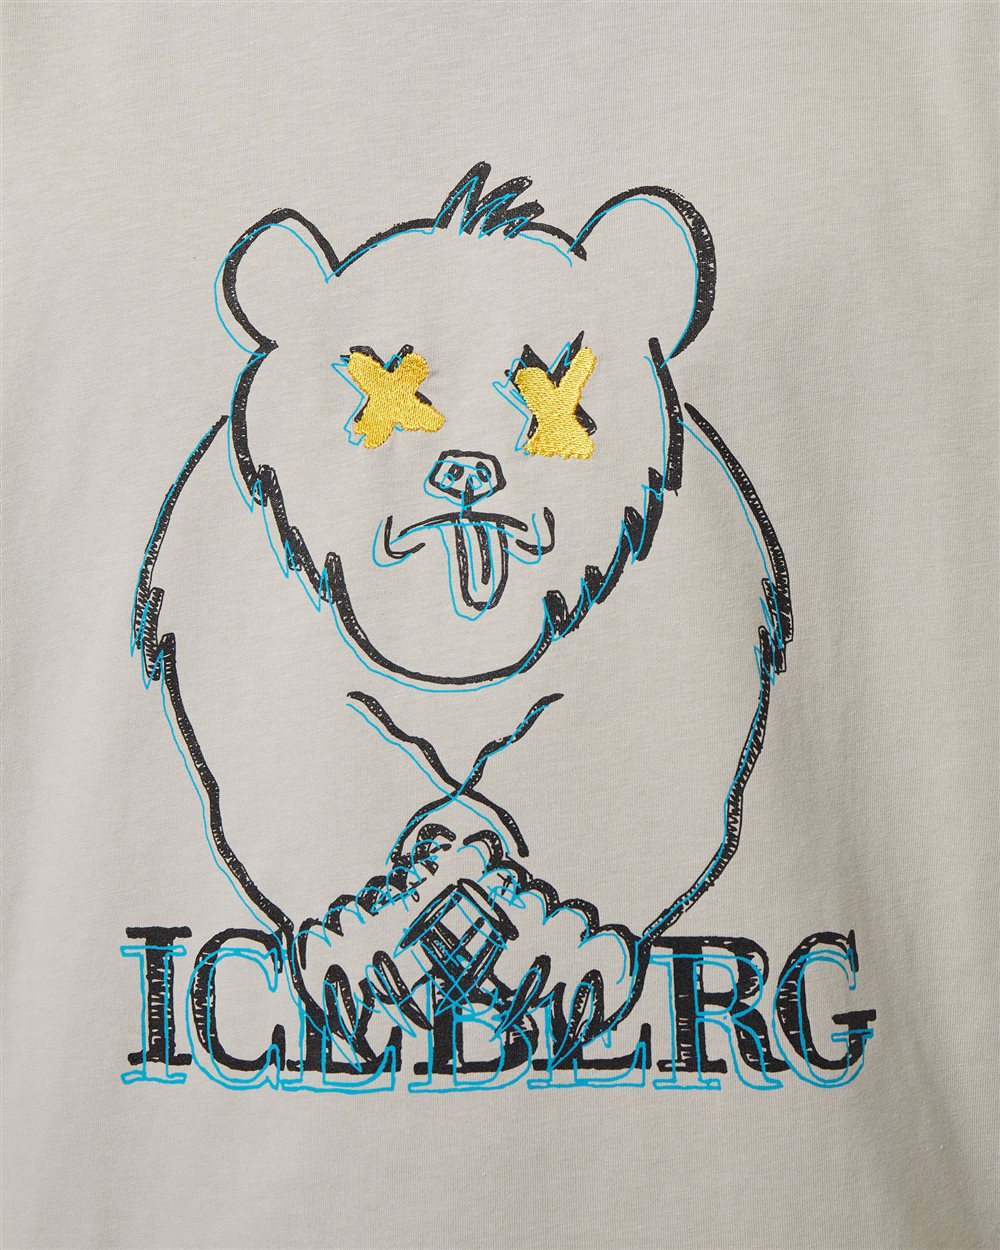 T-shirt with cartoon graphics and logo - Iceberg - Official Website